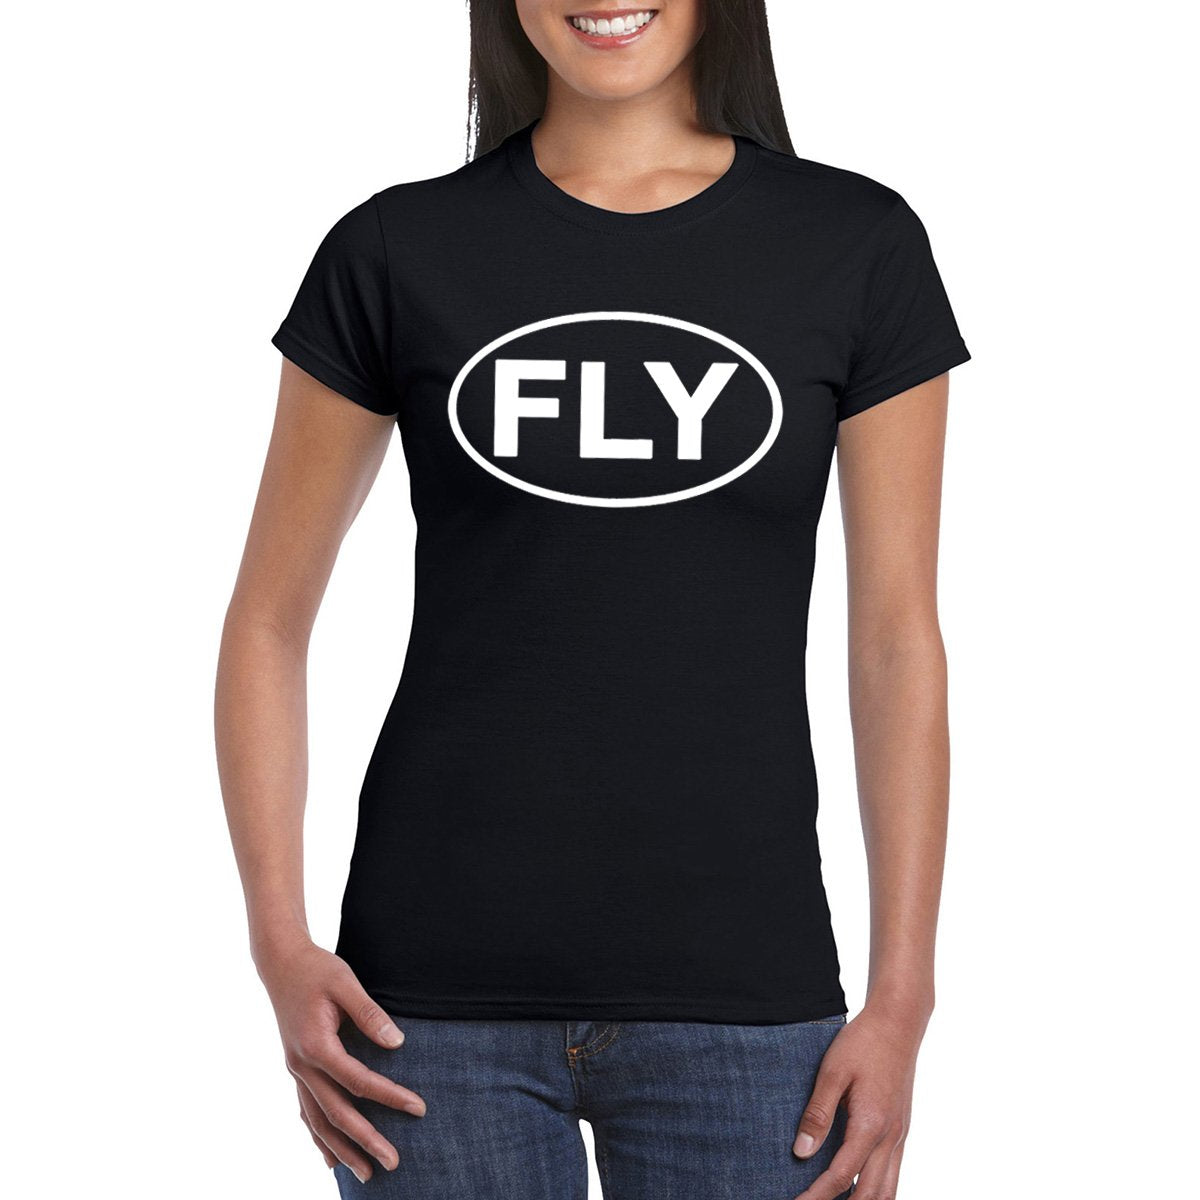 FLY Semi-Fitted Women's T-Shirt